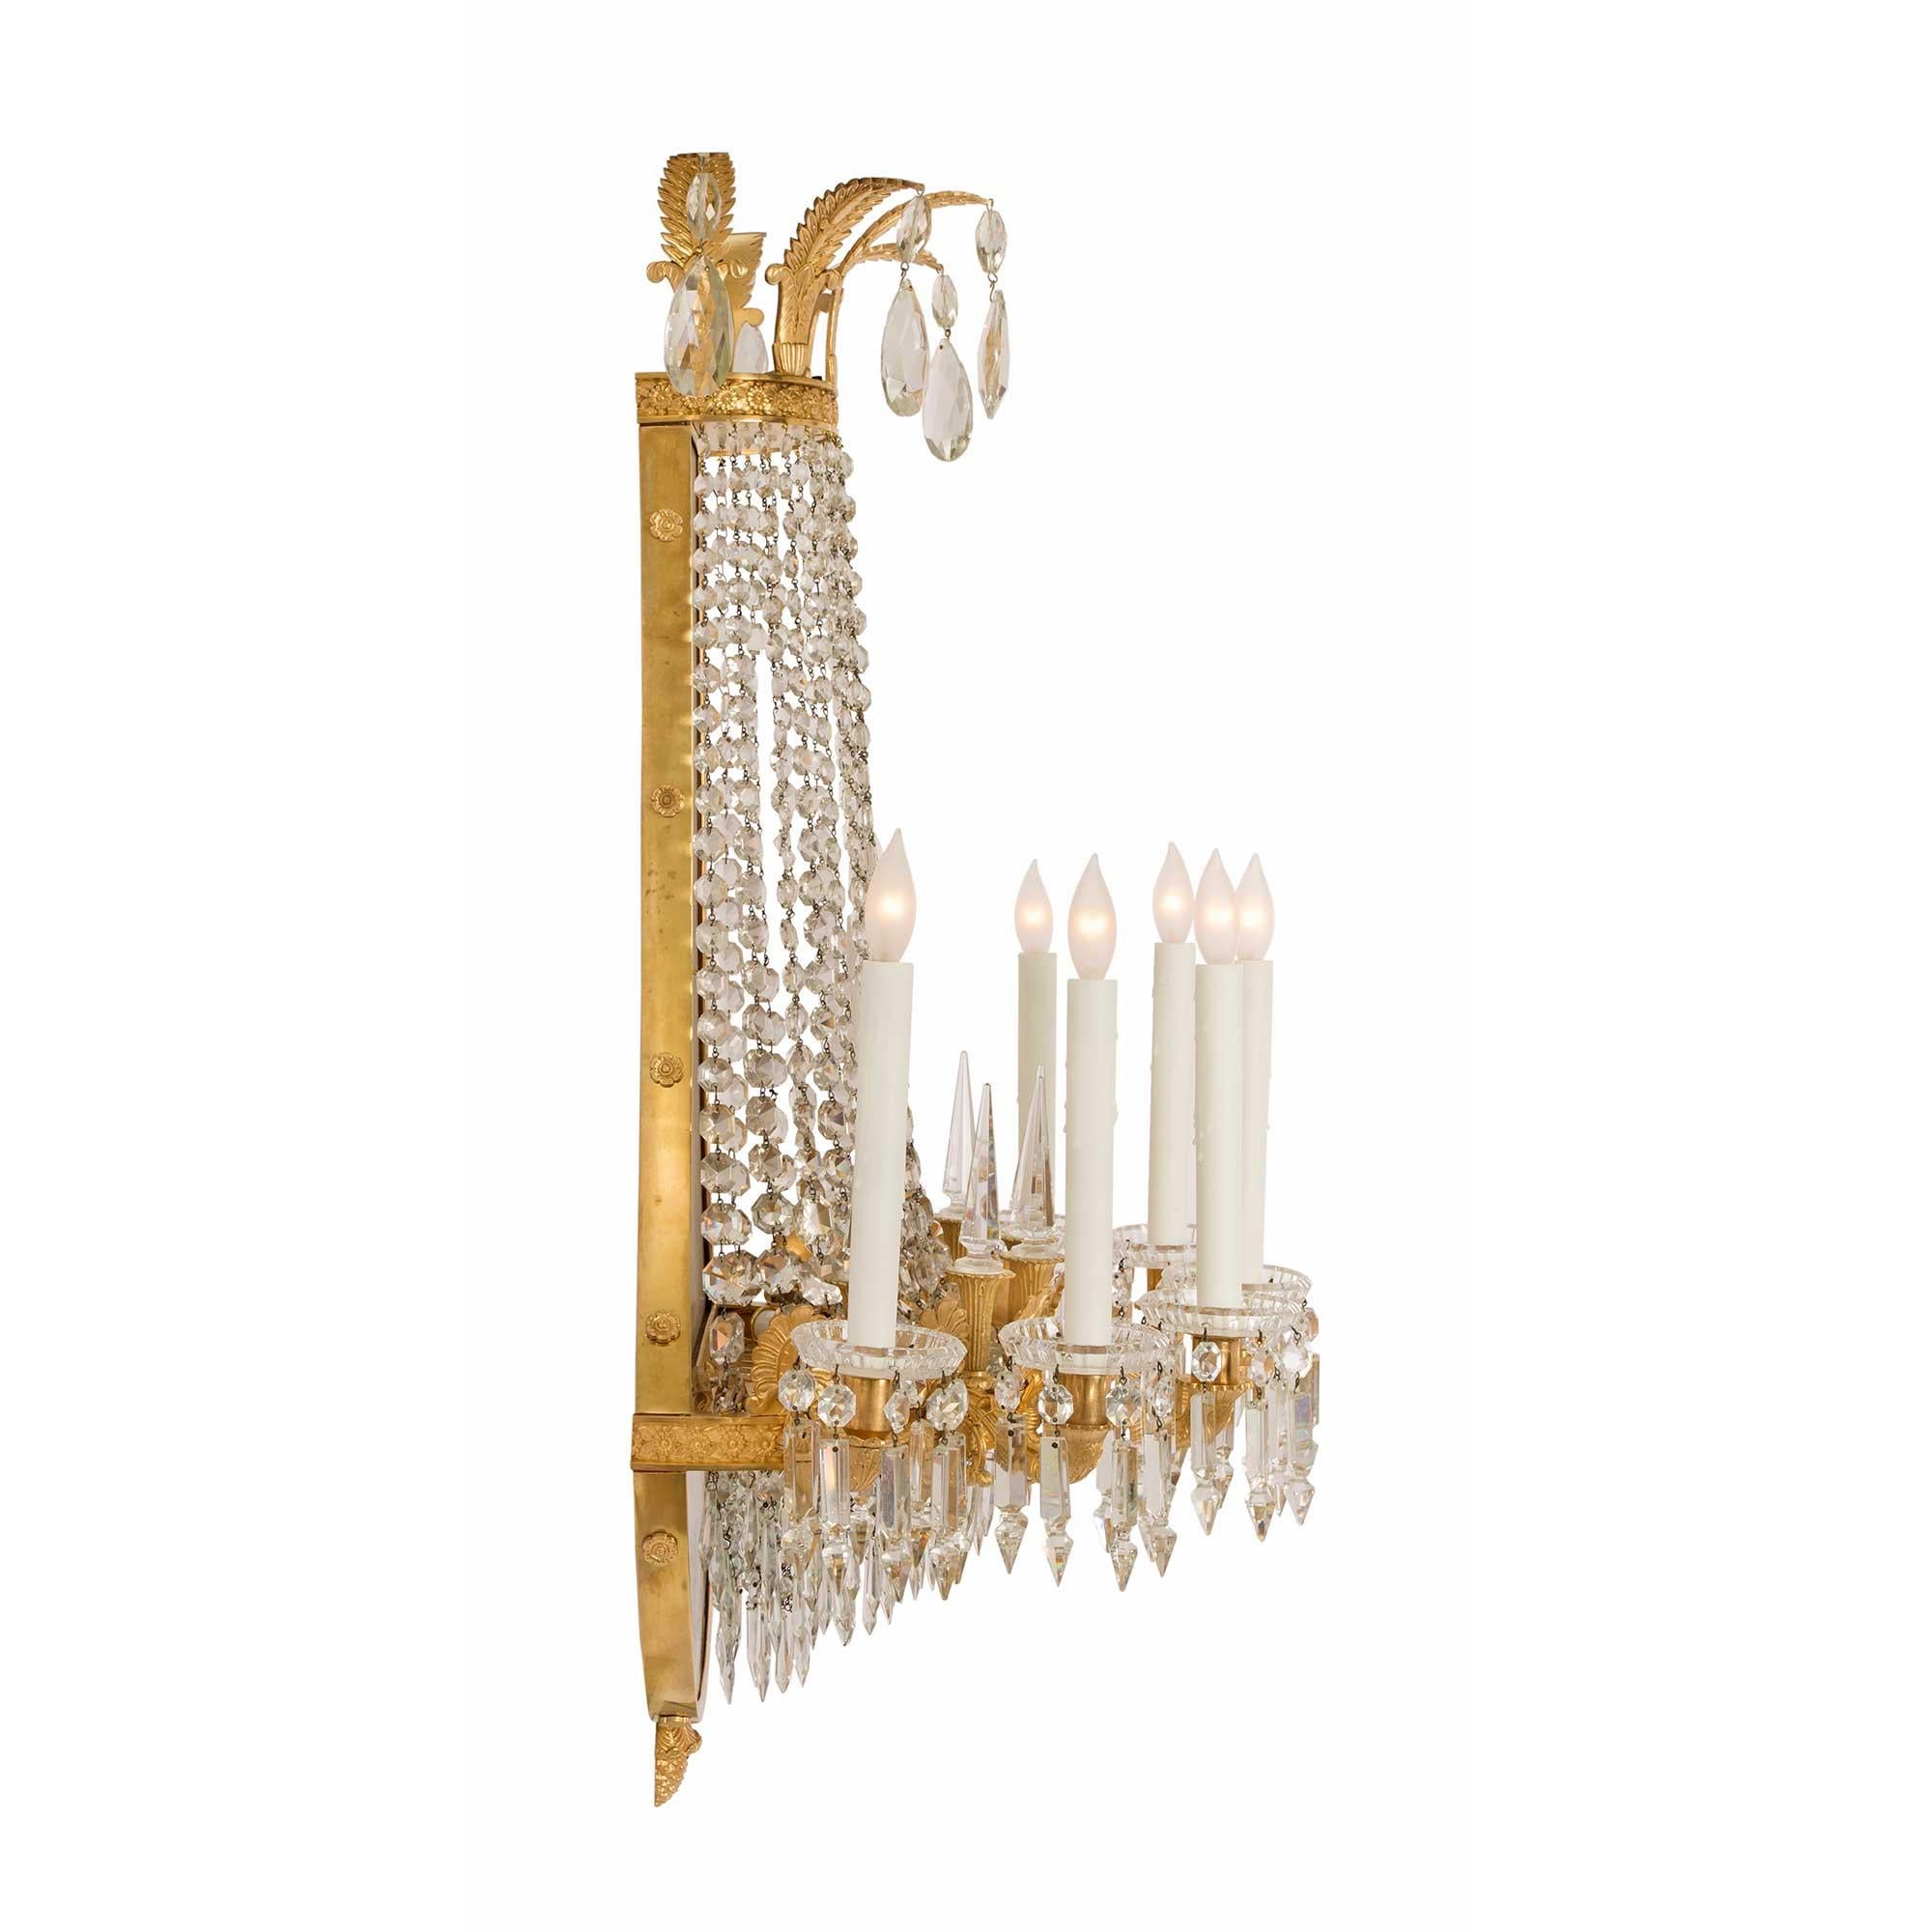 French 19th Century Neoclassical St. Ormolu and Crystal Sconces Signed Baccarat In Good Condition For Sale In West Palm Beach, FL